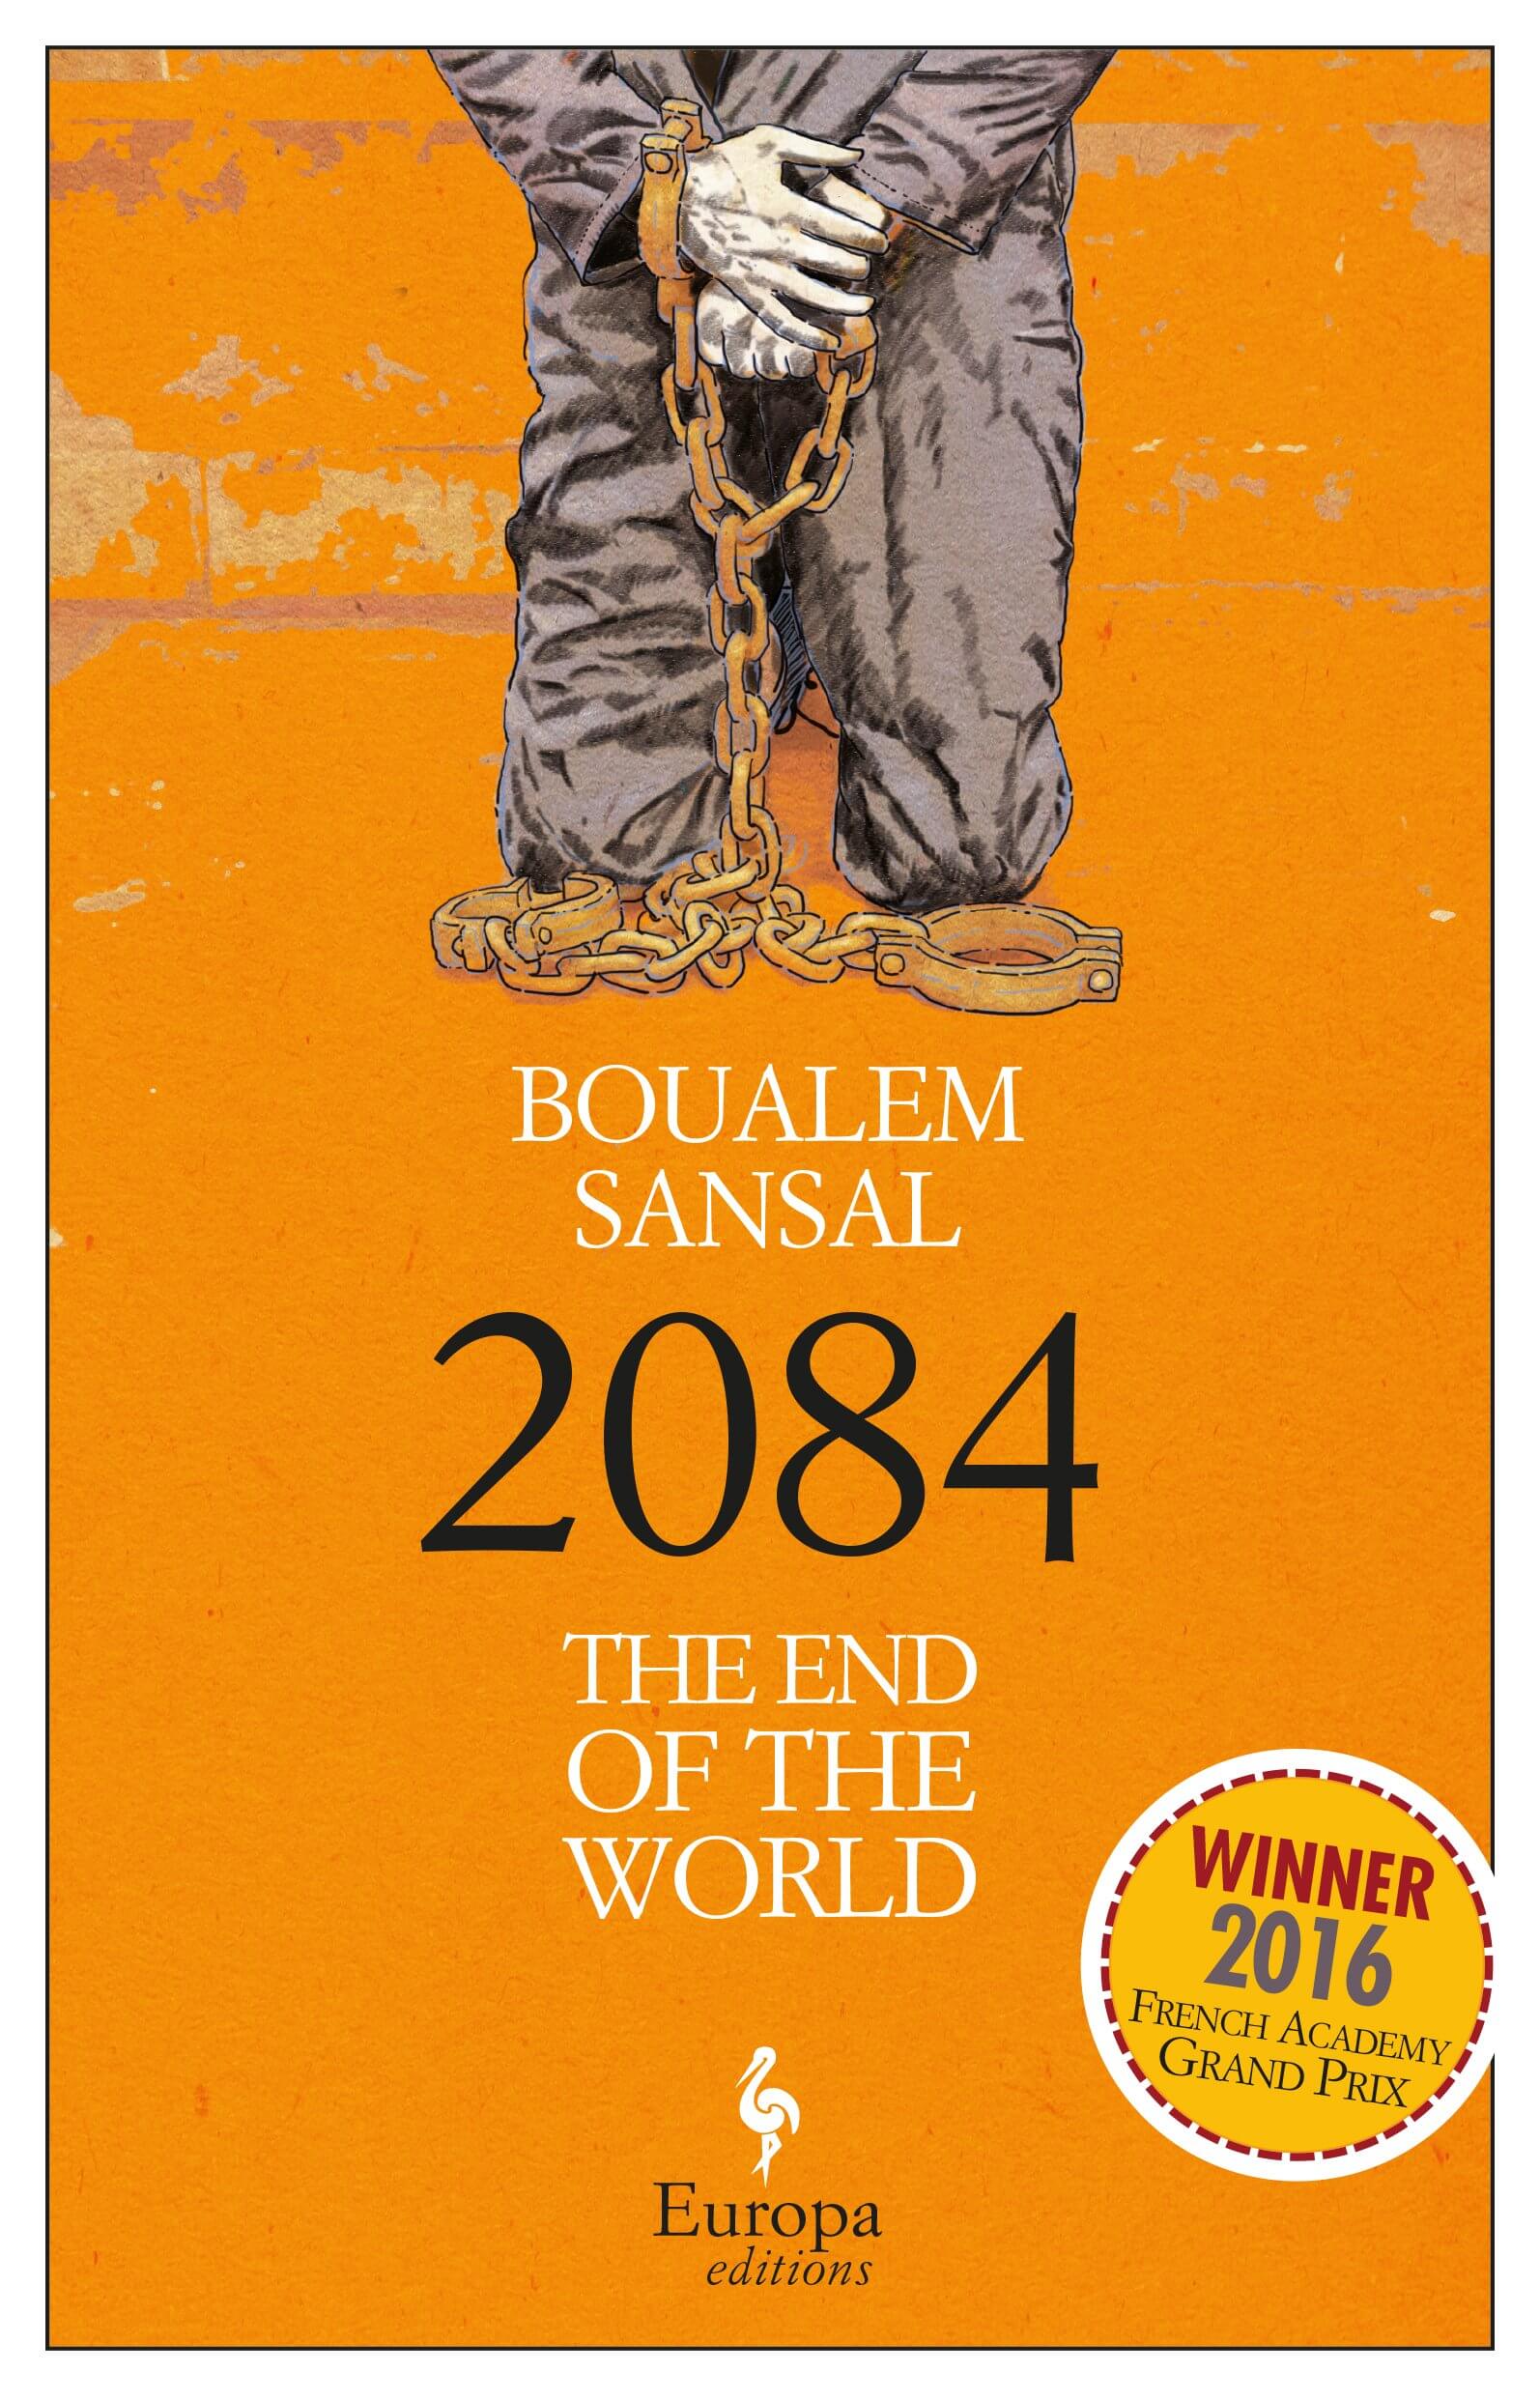 2084 The End Of The World by Boualem Sansal